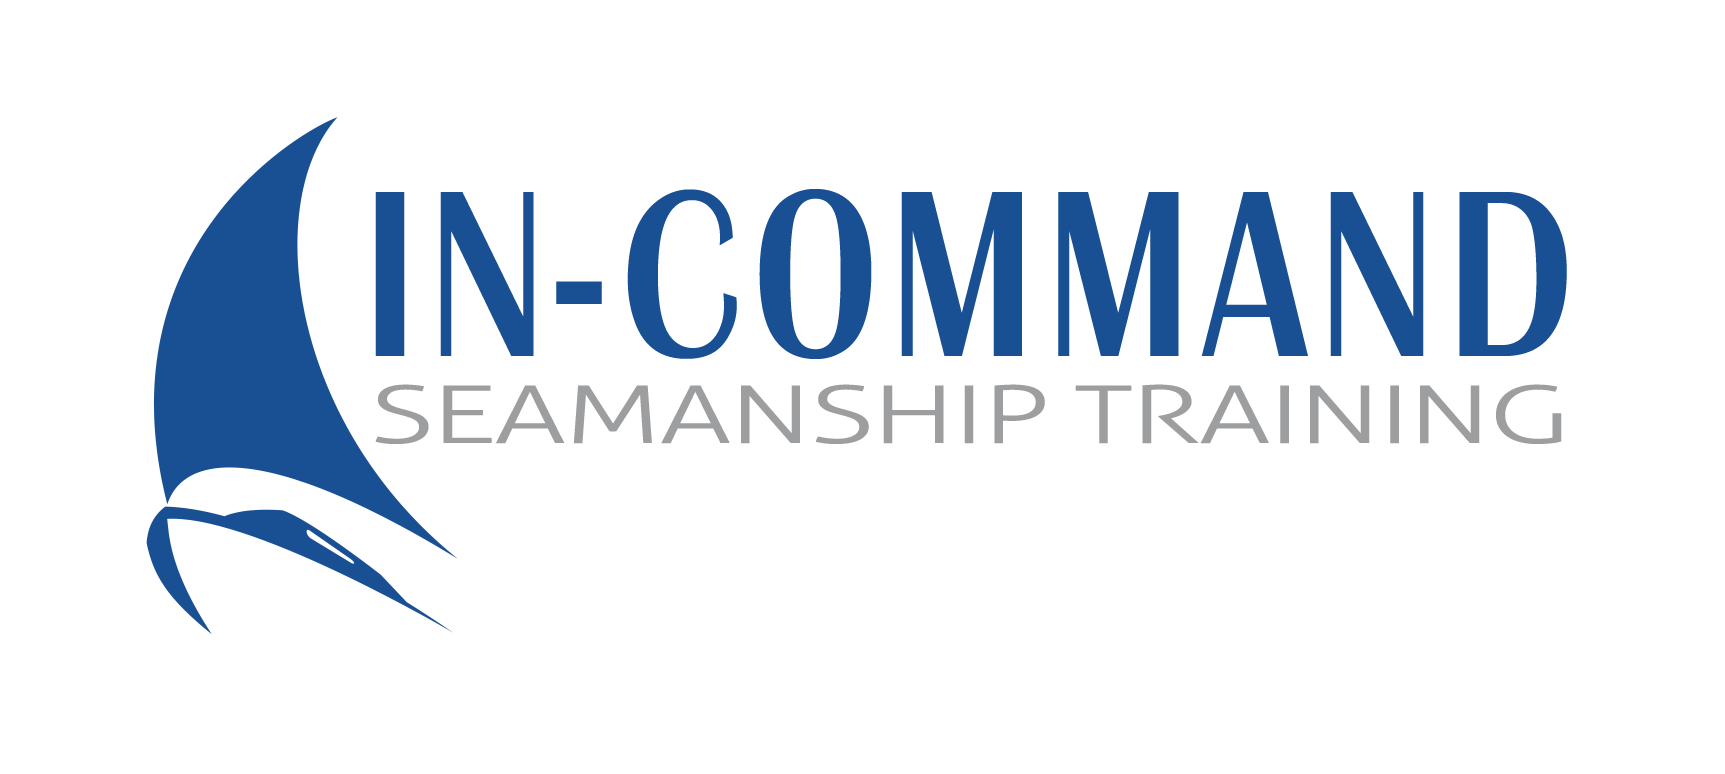 In-Command Seamanship Training - Recreational Boating and Commercial Captain License Training Center